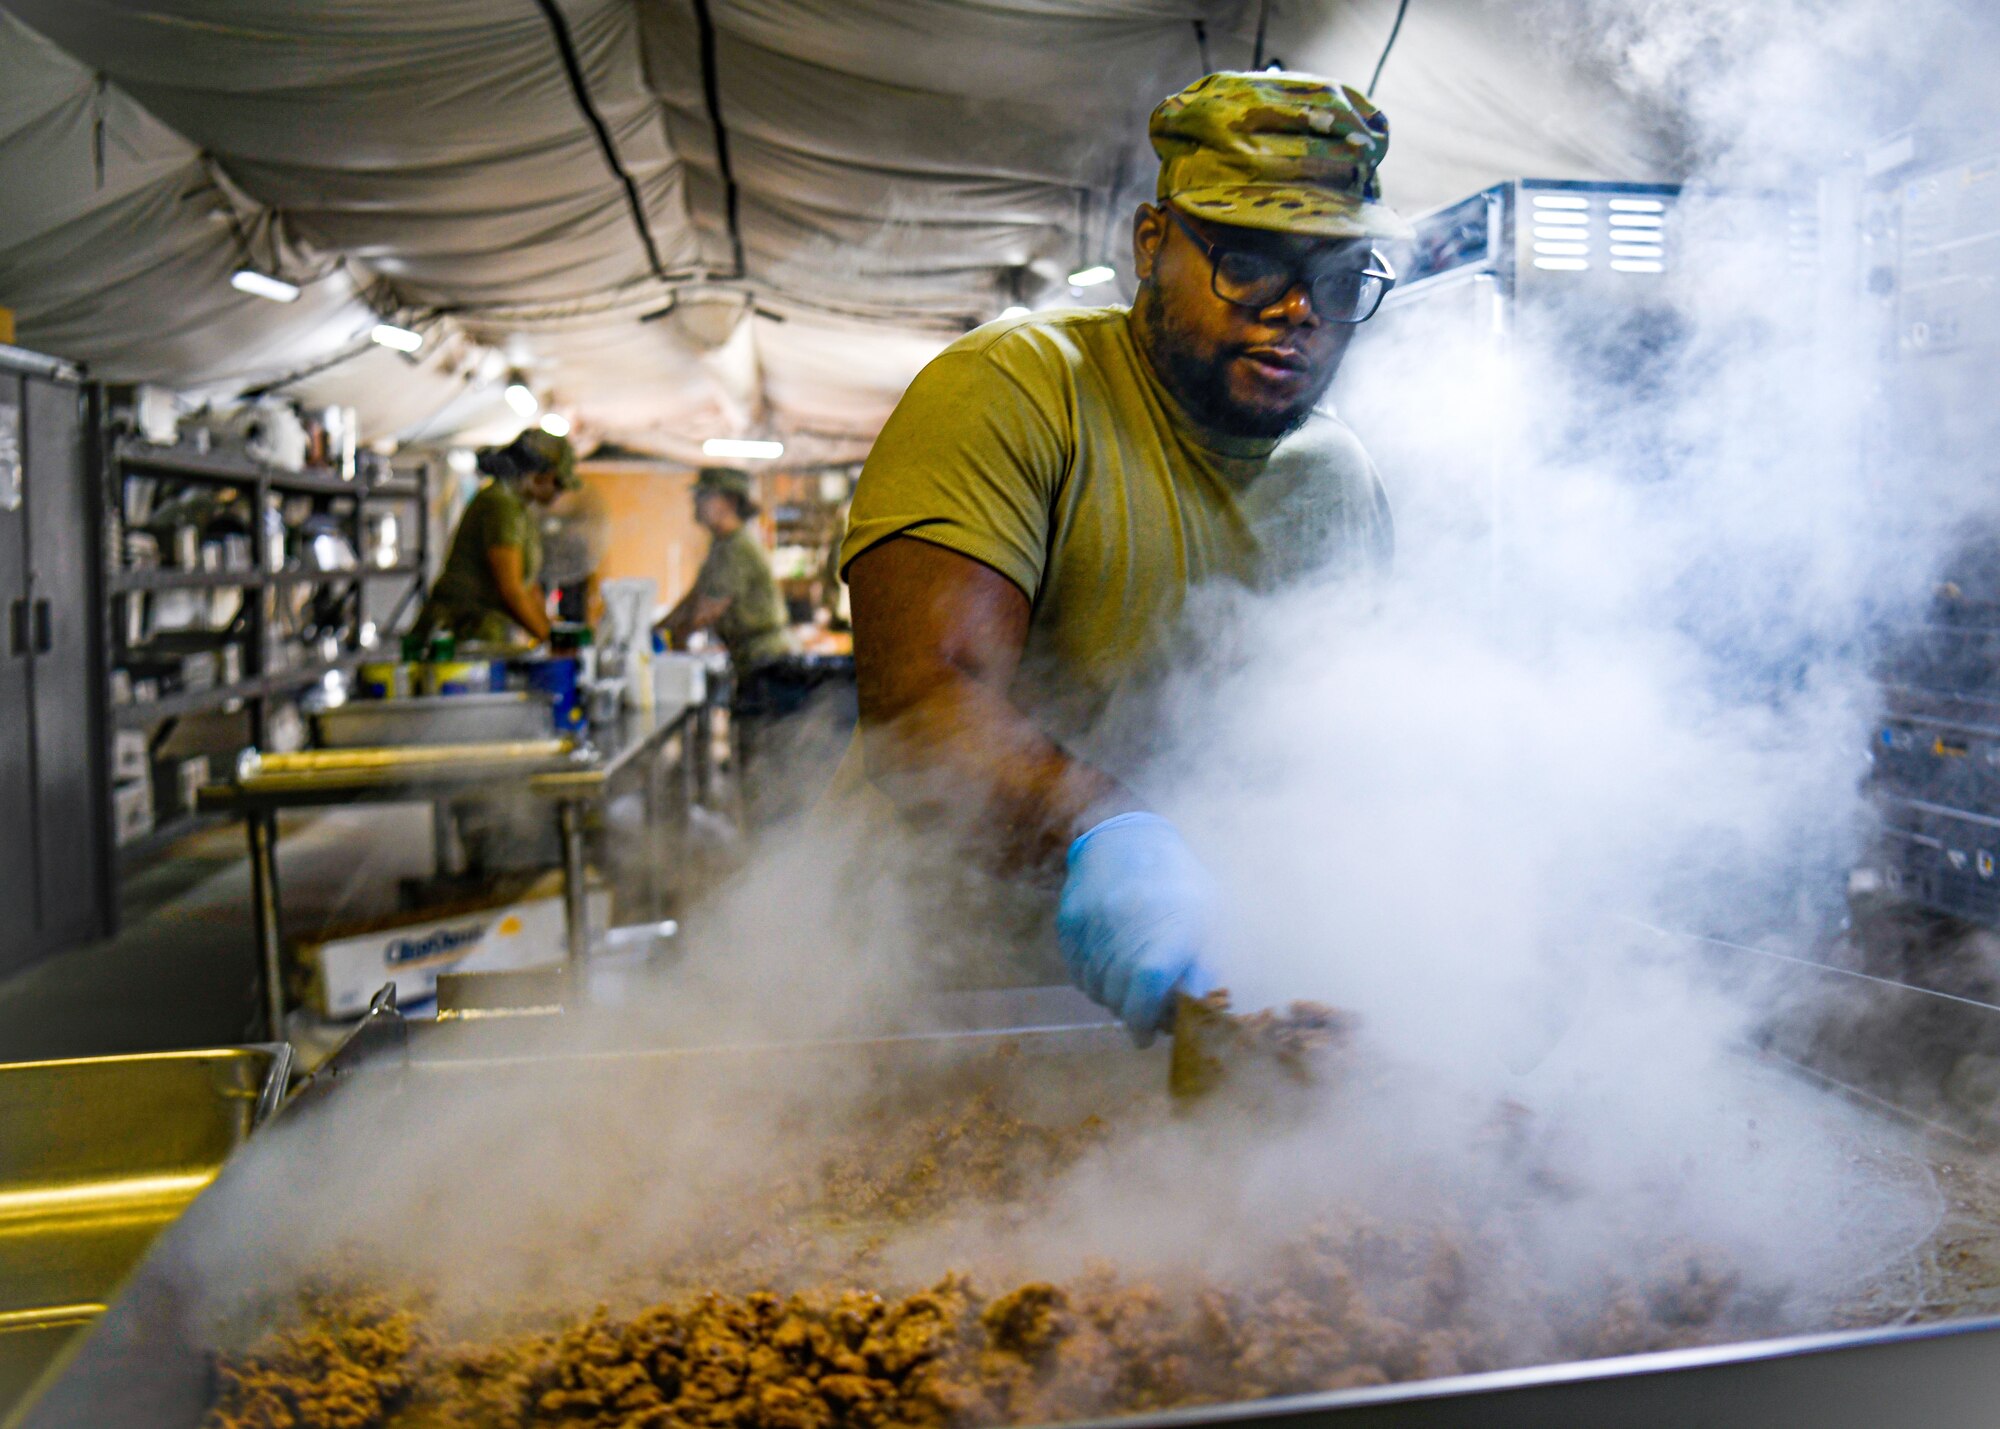 Senior Airman Devonte Whatley, a sustainment service specialist with the 910th Force Support Squadron, prepares lunch in a field kitchen, March 31, 2023, at Dobbins Air Reserve Base, Georgia.